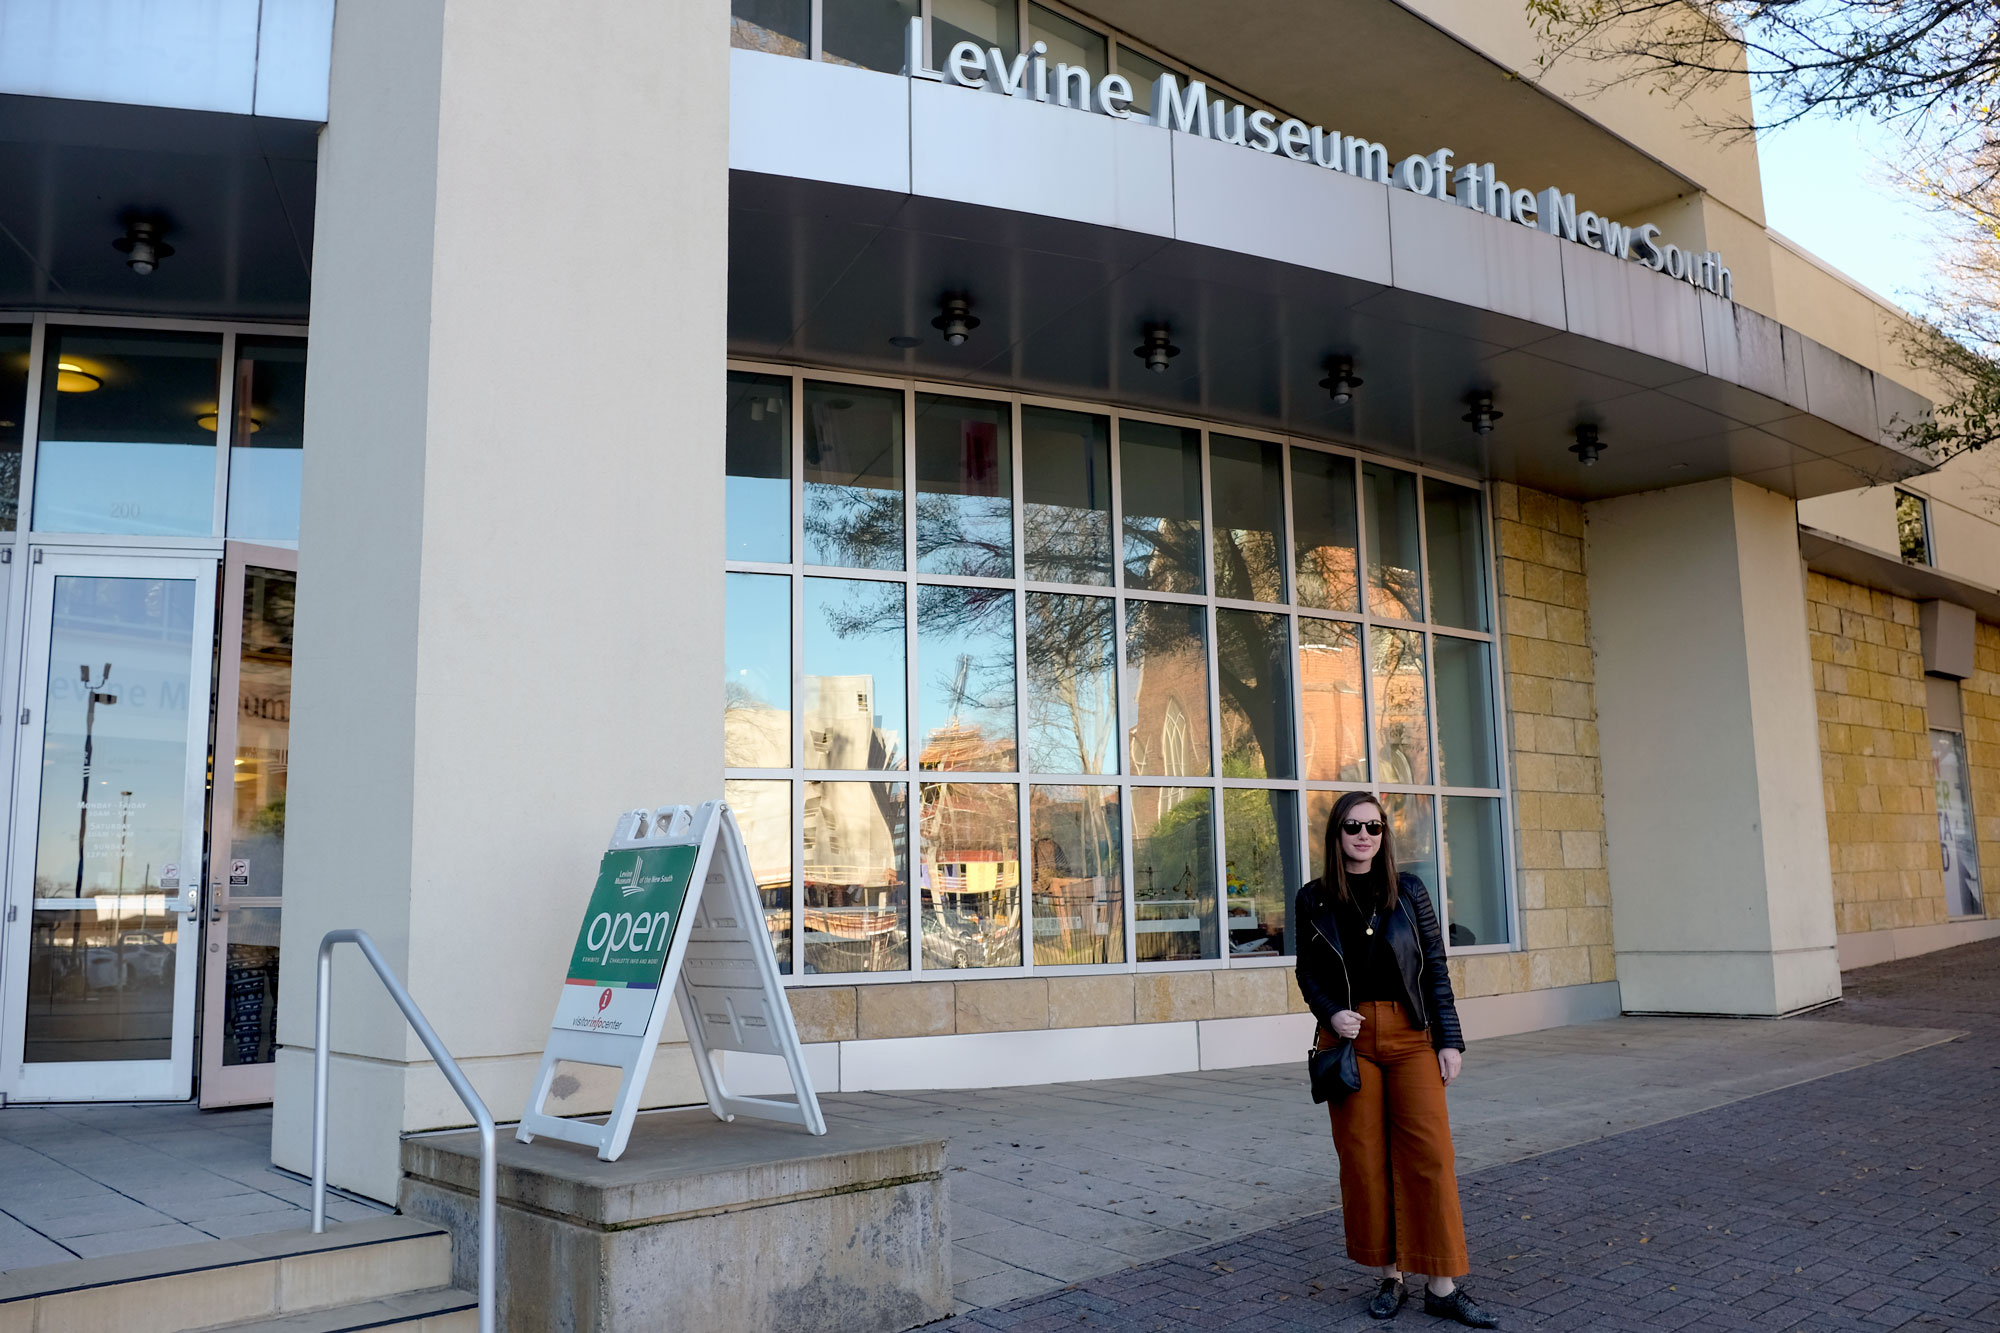 Alyssa standing in front of the Levine Museum of the New South